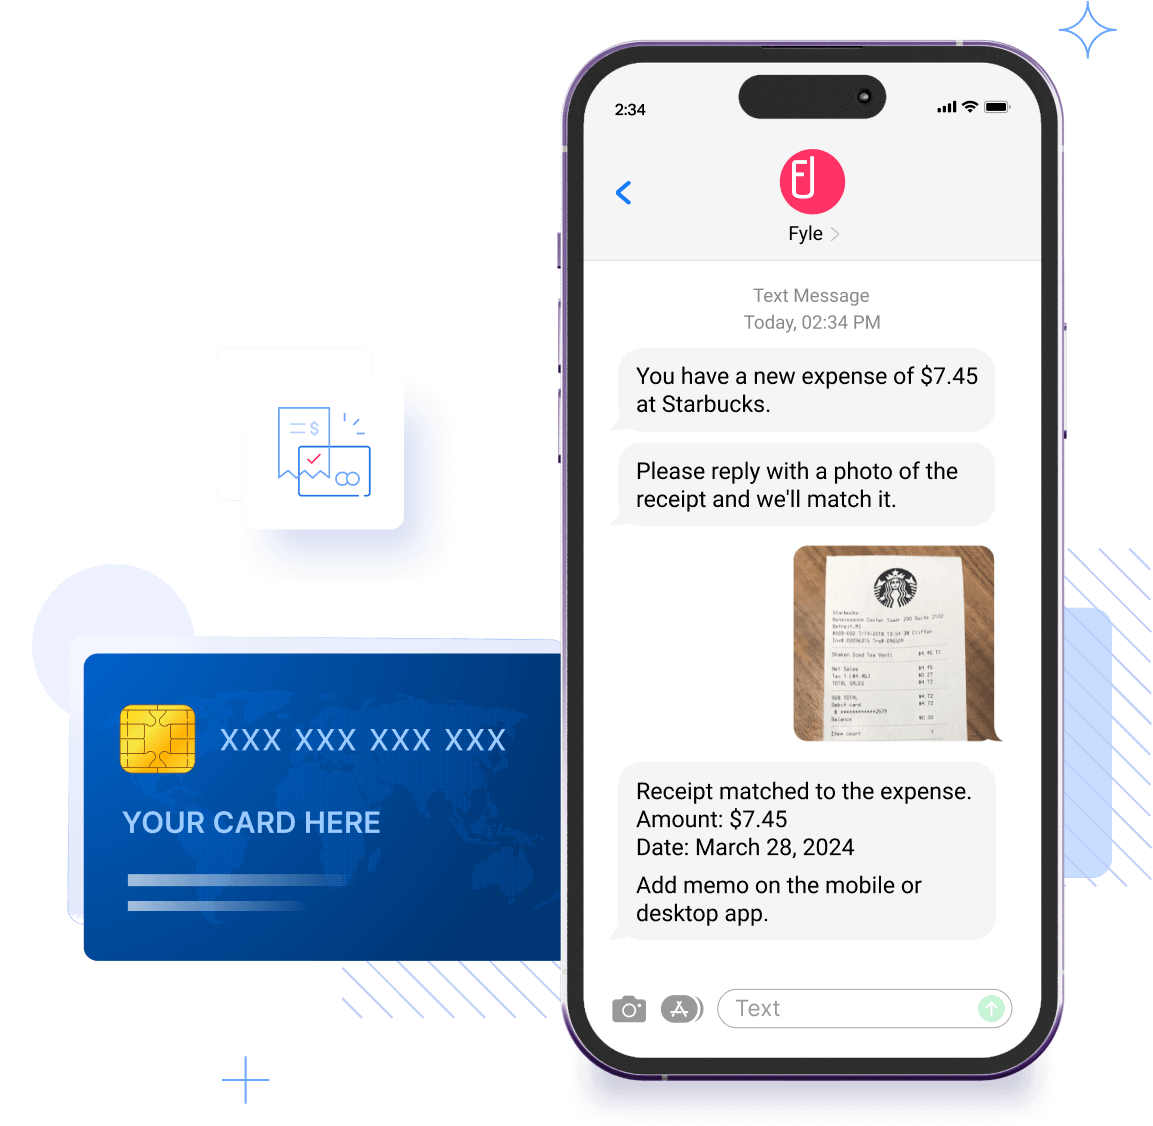 Real-time expense management on cards you already have